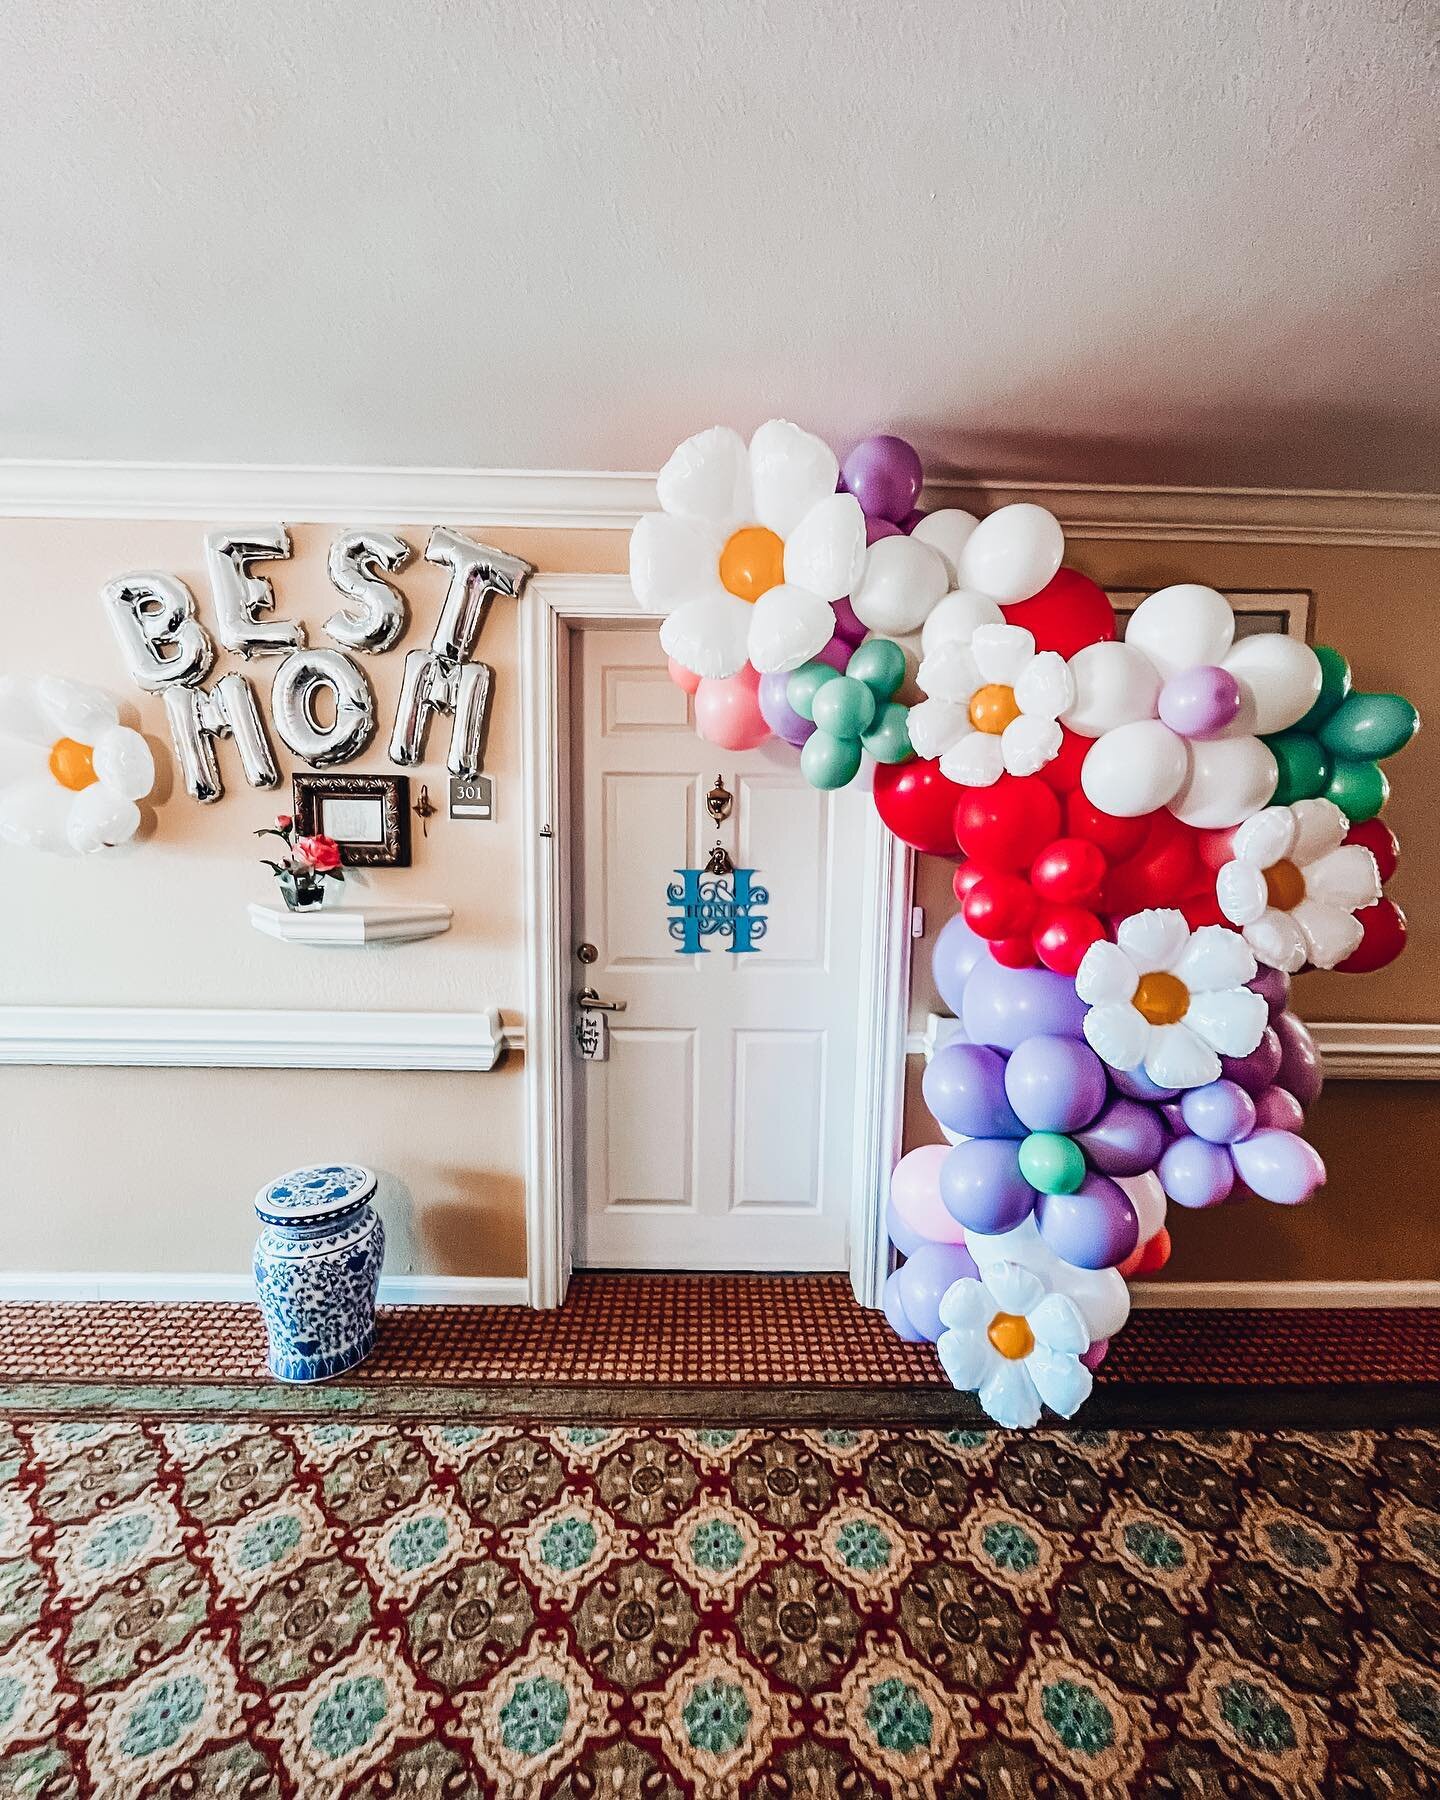 🌸BEST MOM🌸

Make your momma feel special this Mothers Day with a gorgeous balloon garland✨

Our garlands last up to 3-4 weeks inside so she can feel celebrated ALL month long🥰
&bull;
&bull;
&bull;
#balloontherapyokc #balloons #balloon #therapy #fl